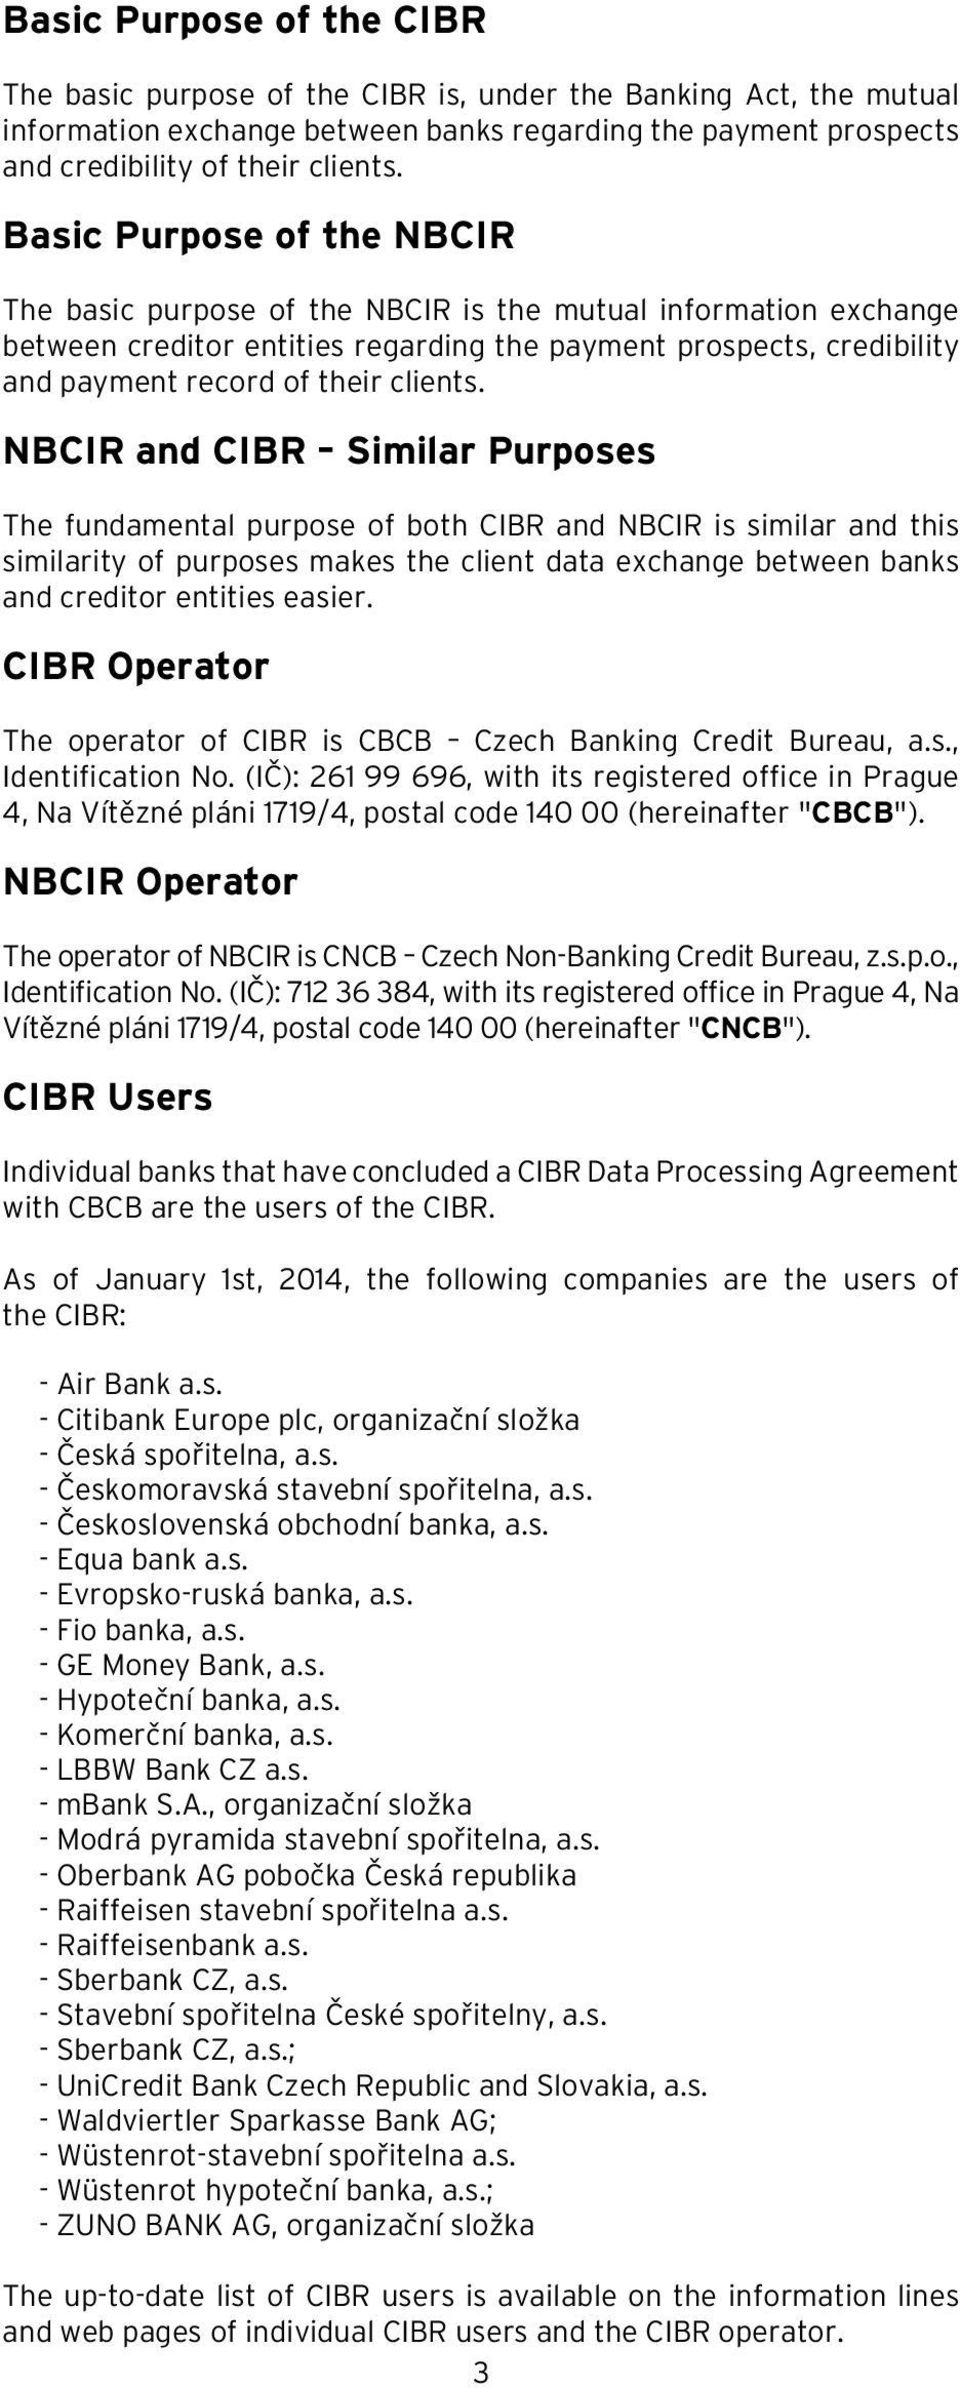 NBCIR and CIBR Similar Purposes The fundamental purpose of both CIBR and NBCIR is similar and this similarity of purposes makes the client data exchange between banks and creditor entities easier.